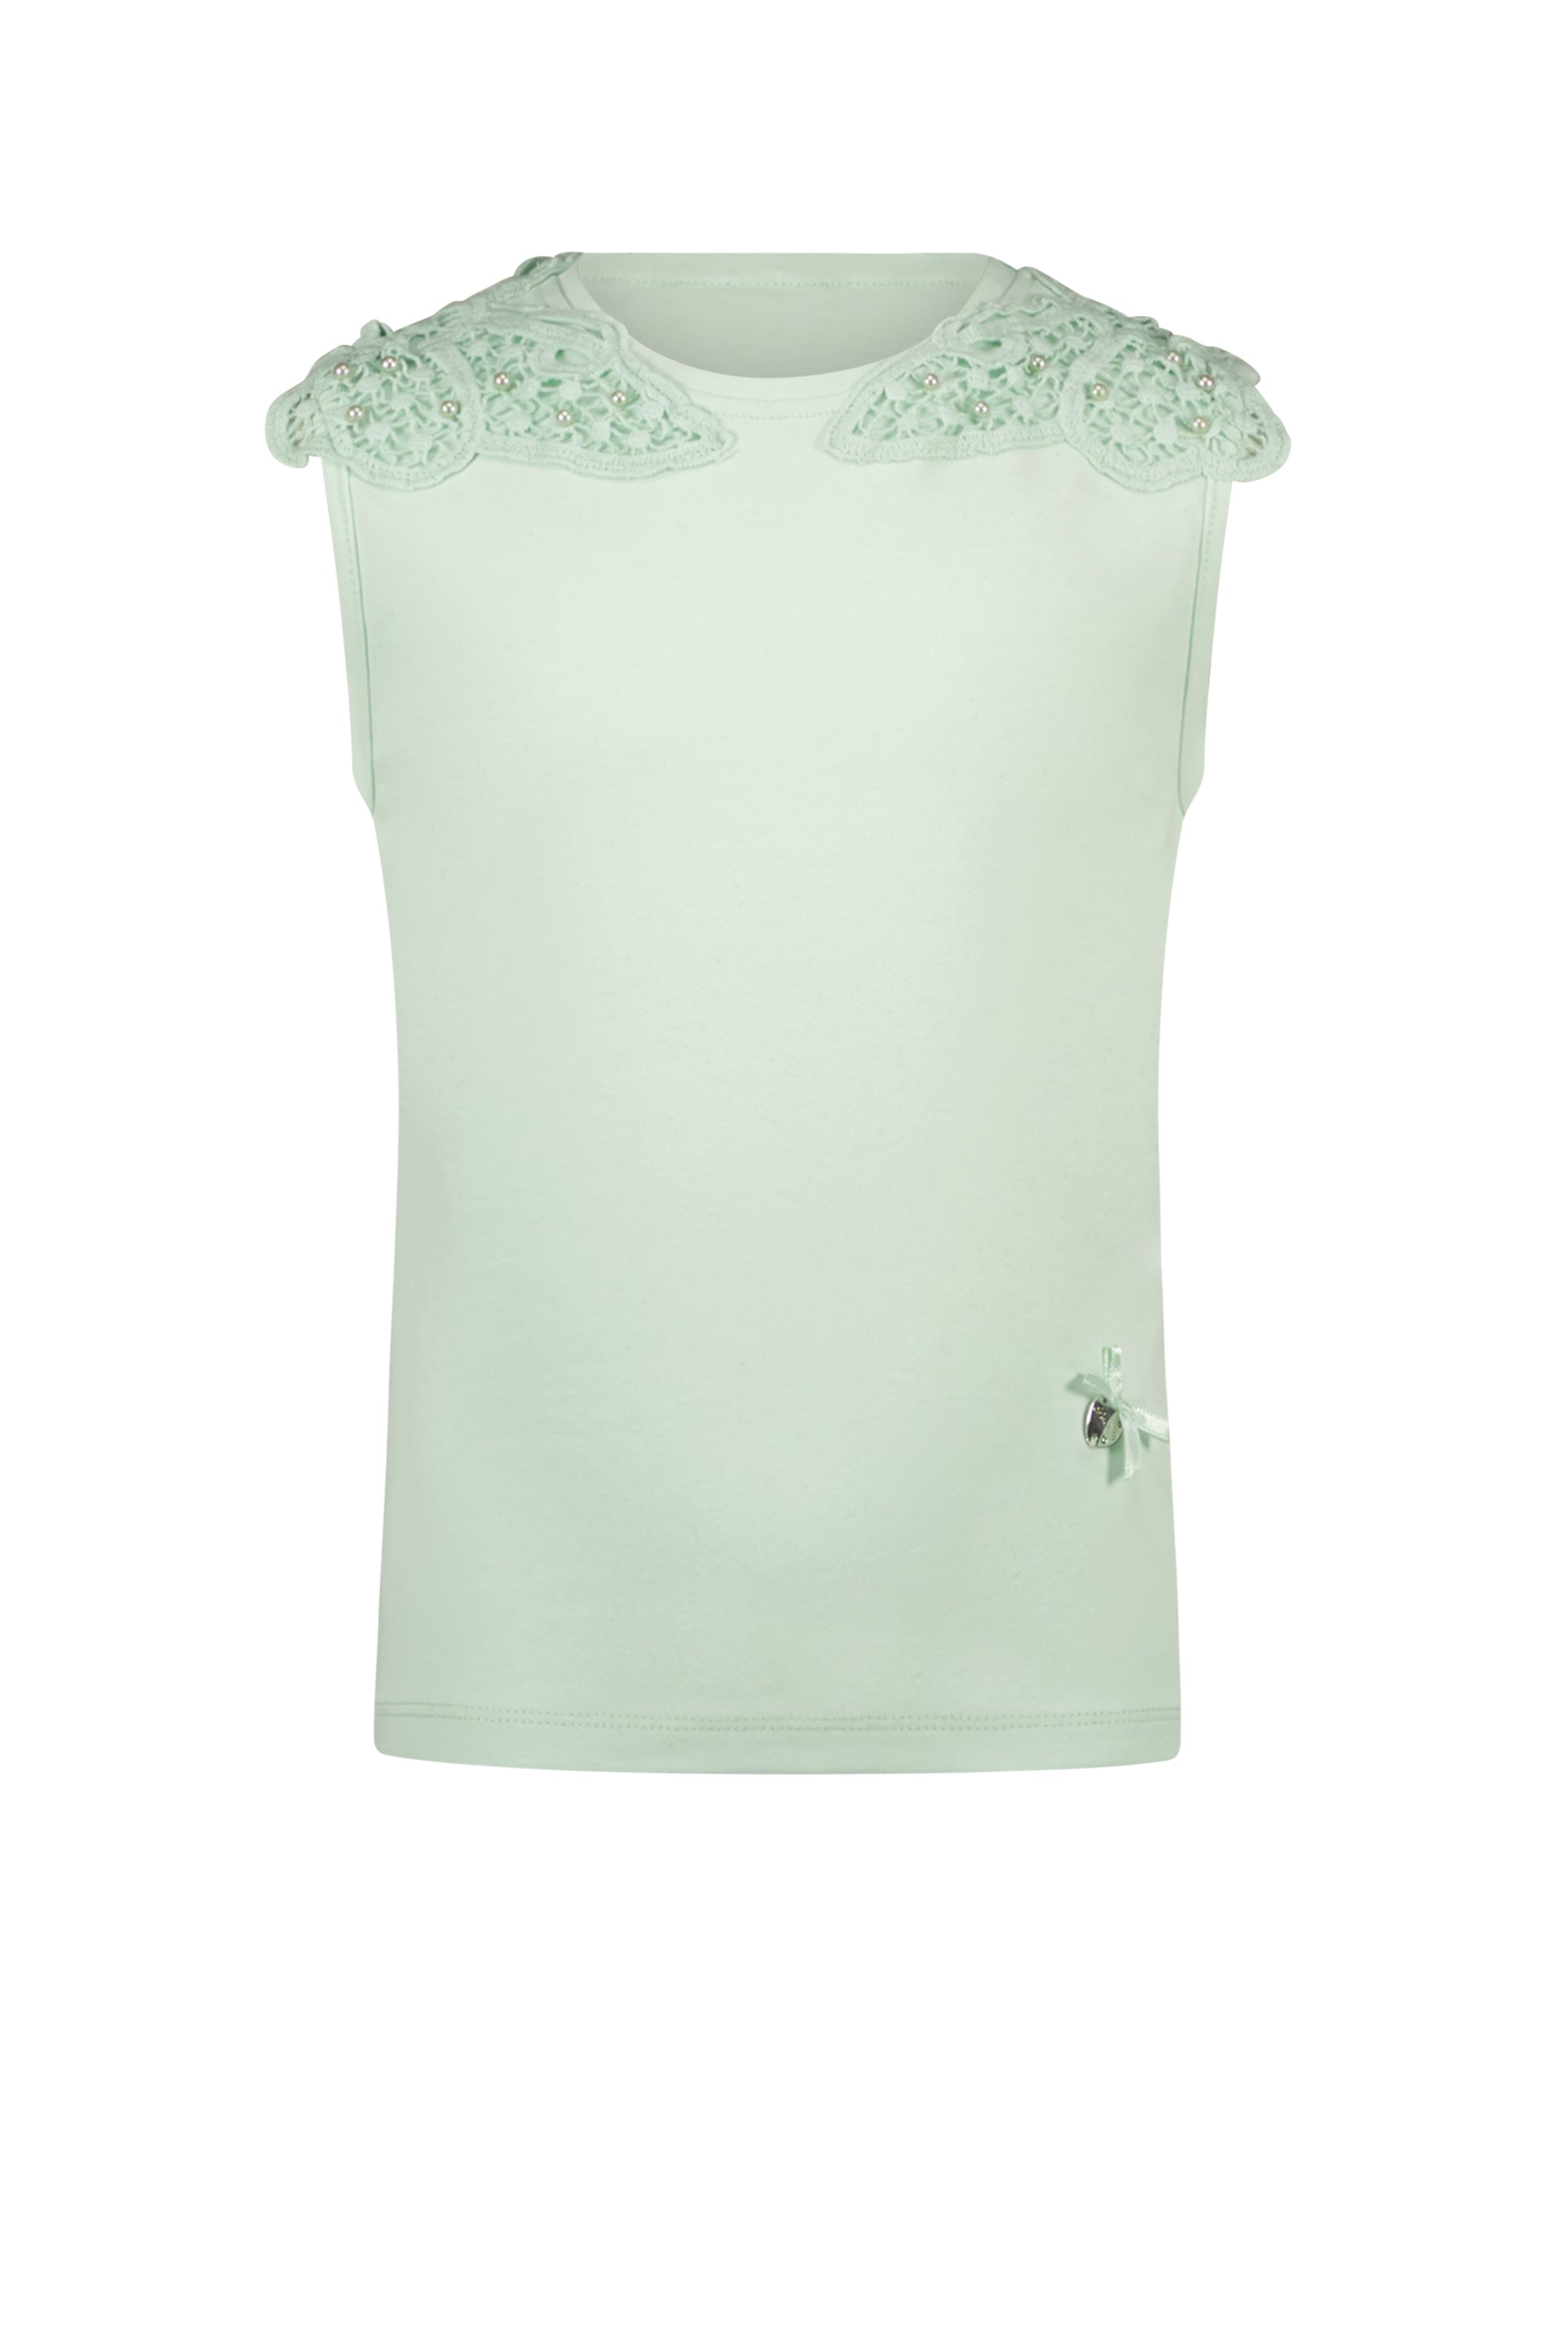 NOOSHY butterfly lace T-shirt